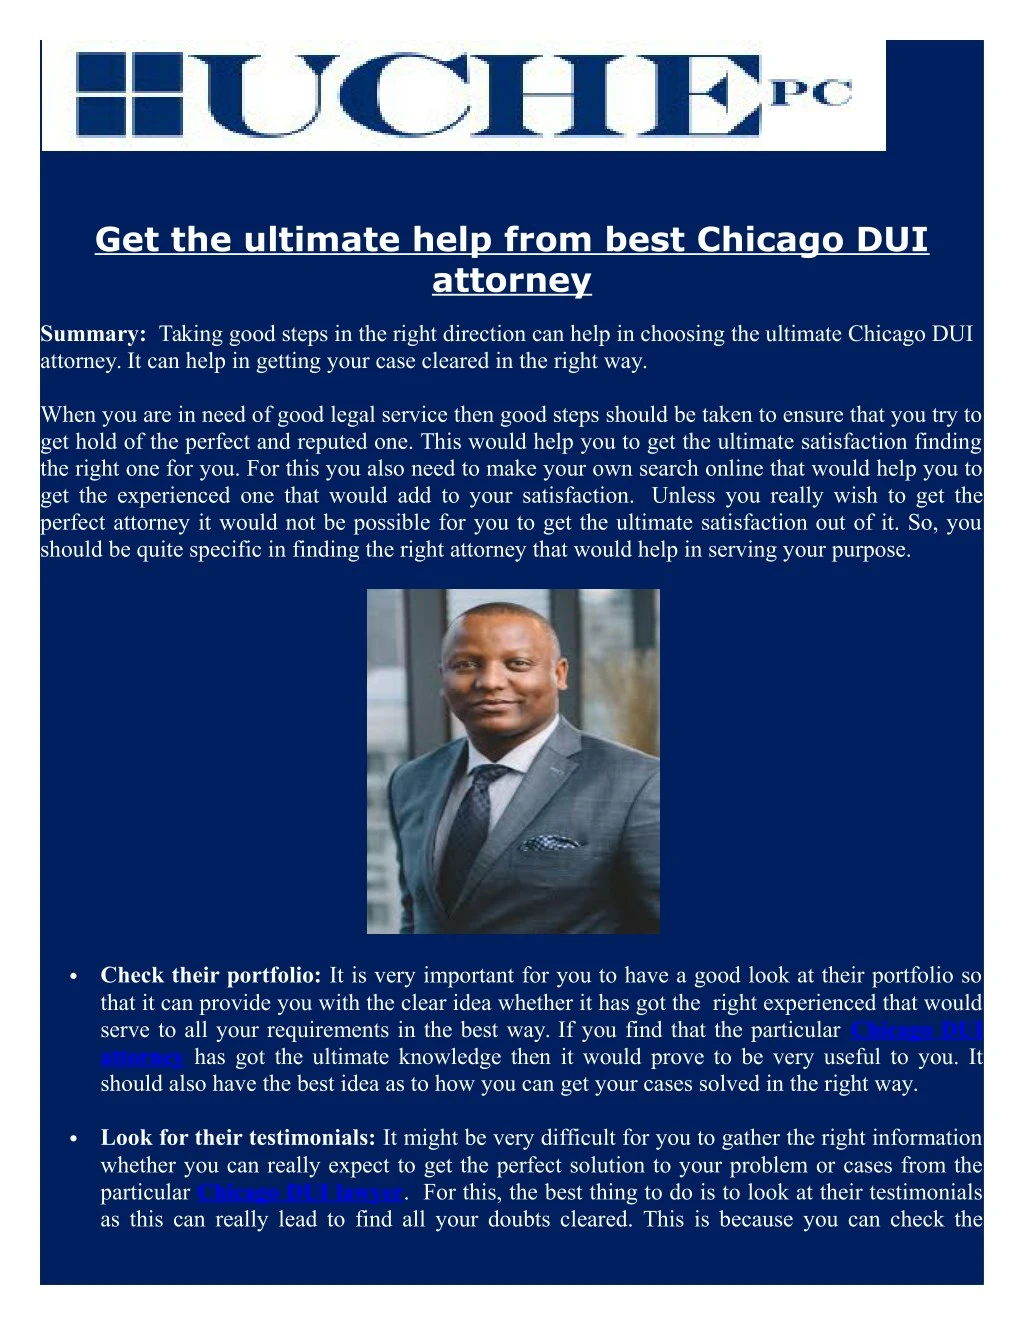 get the ultimate help from best chicago